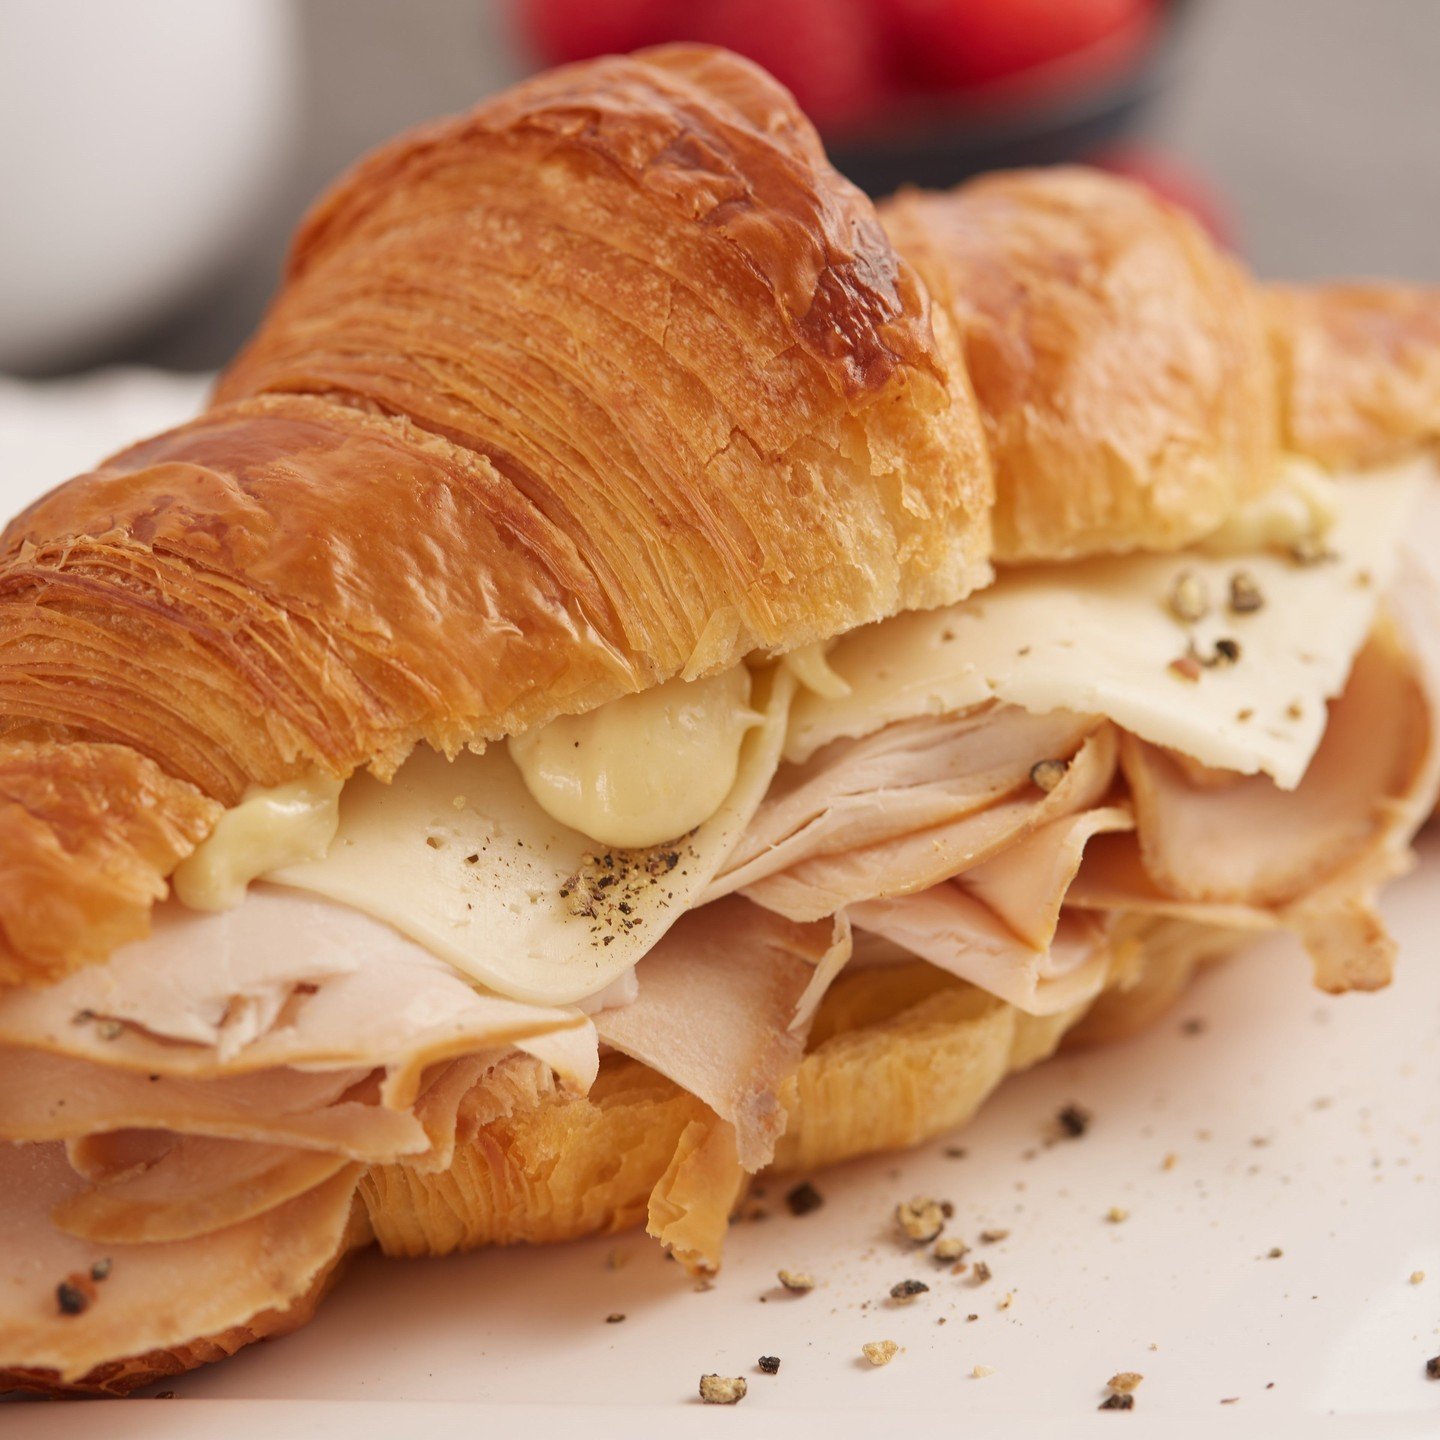 Wondering what to do for lunch today? Come visit us and let us solve that problem with our Turkey Sandwich! We layer smoked turkey, creamy havarti, and Dijon aioli on a freshly baked buttery, flaky croissant. See why Travel + Leisure once named it th